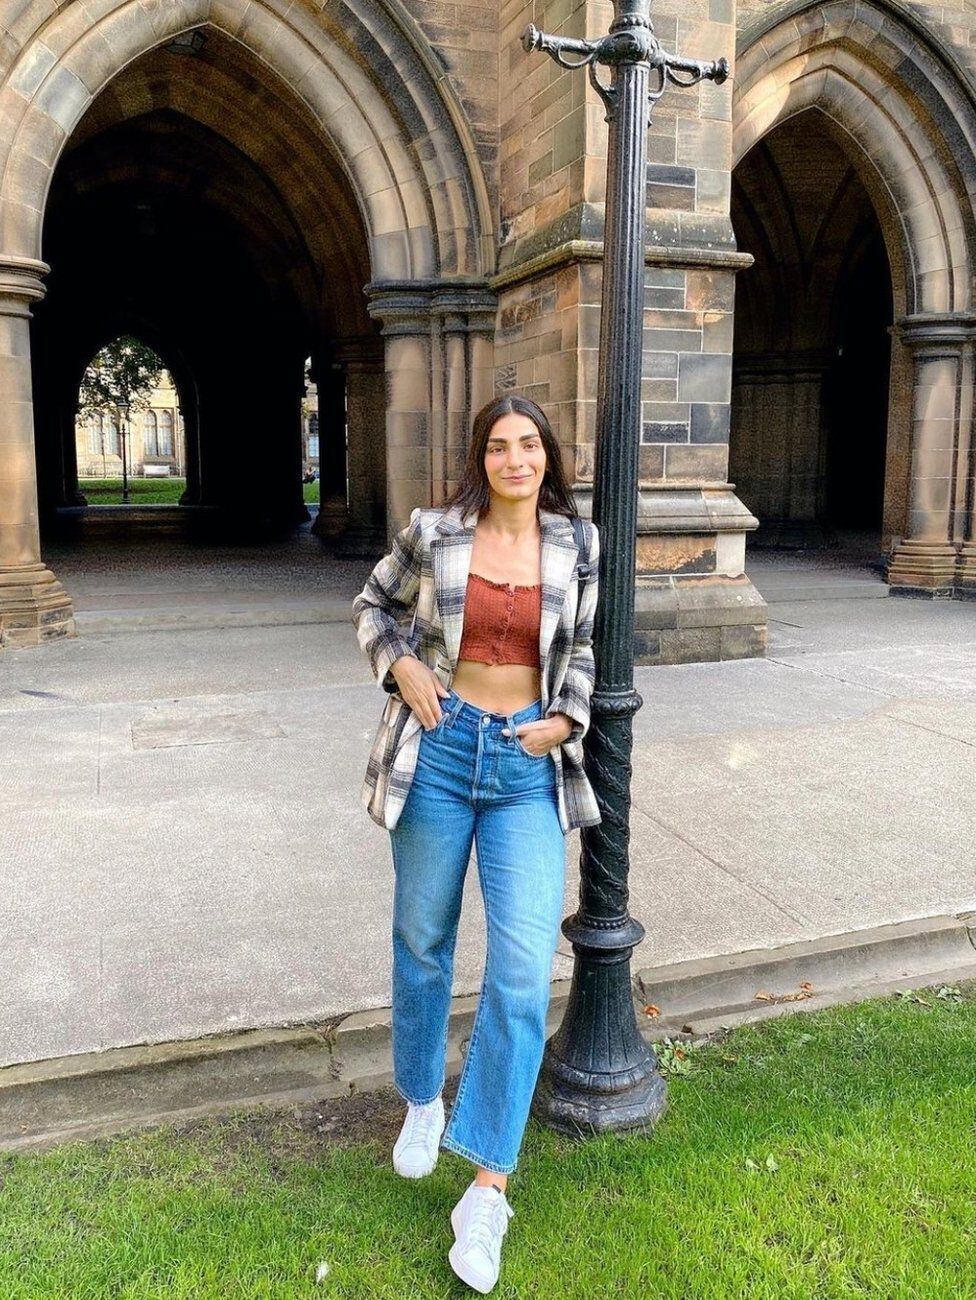 Ellie studied at the University of Glasgow